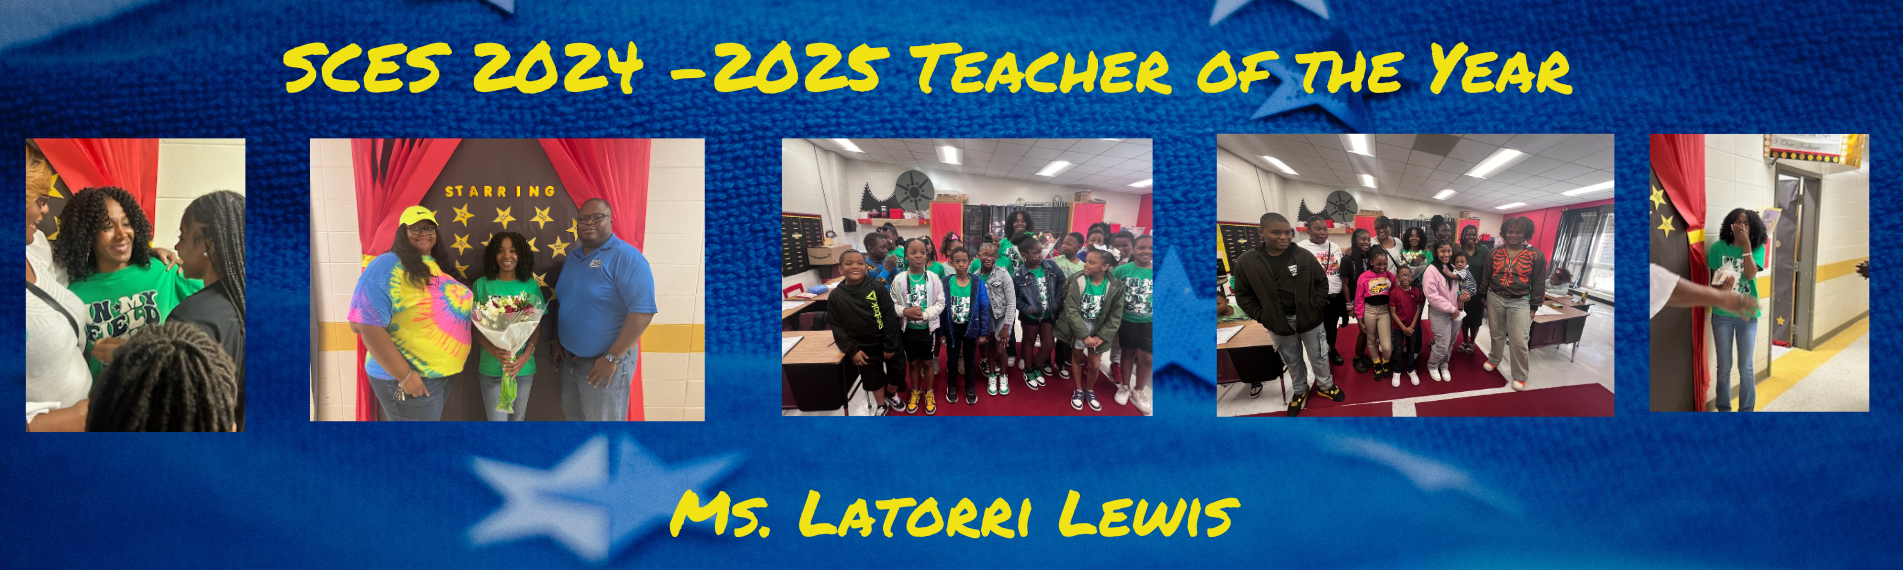 SCES 2024 - 2025 Teacher of the Year 